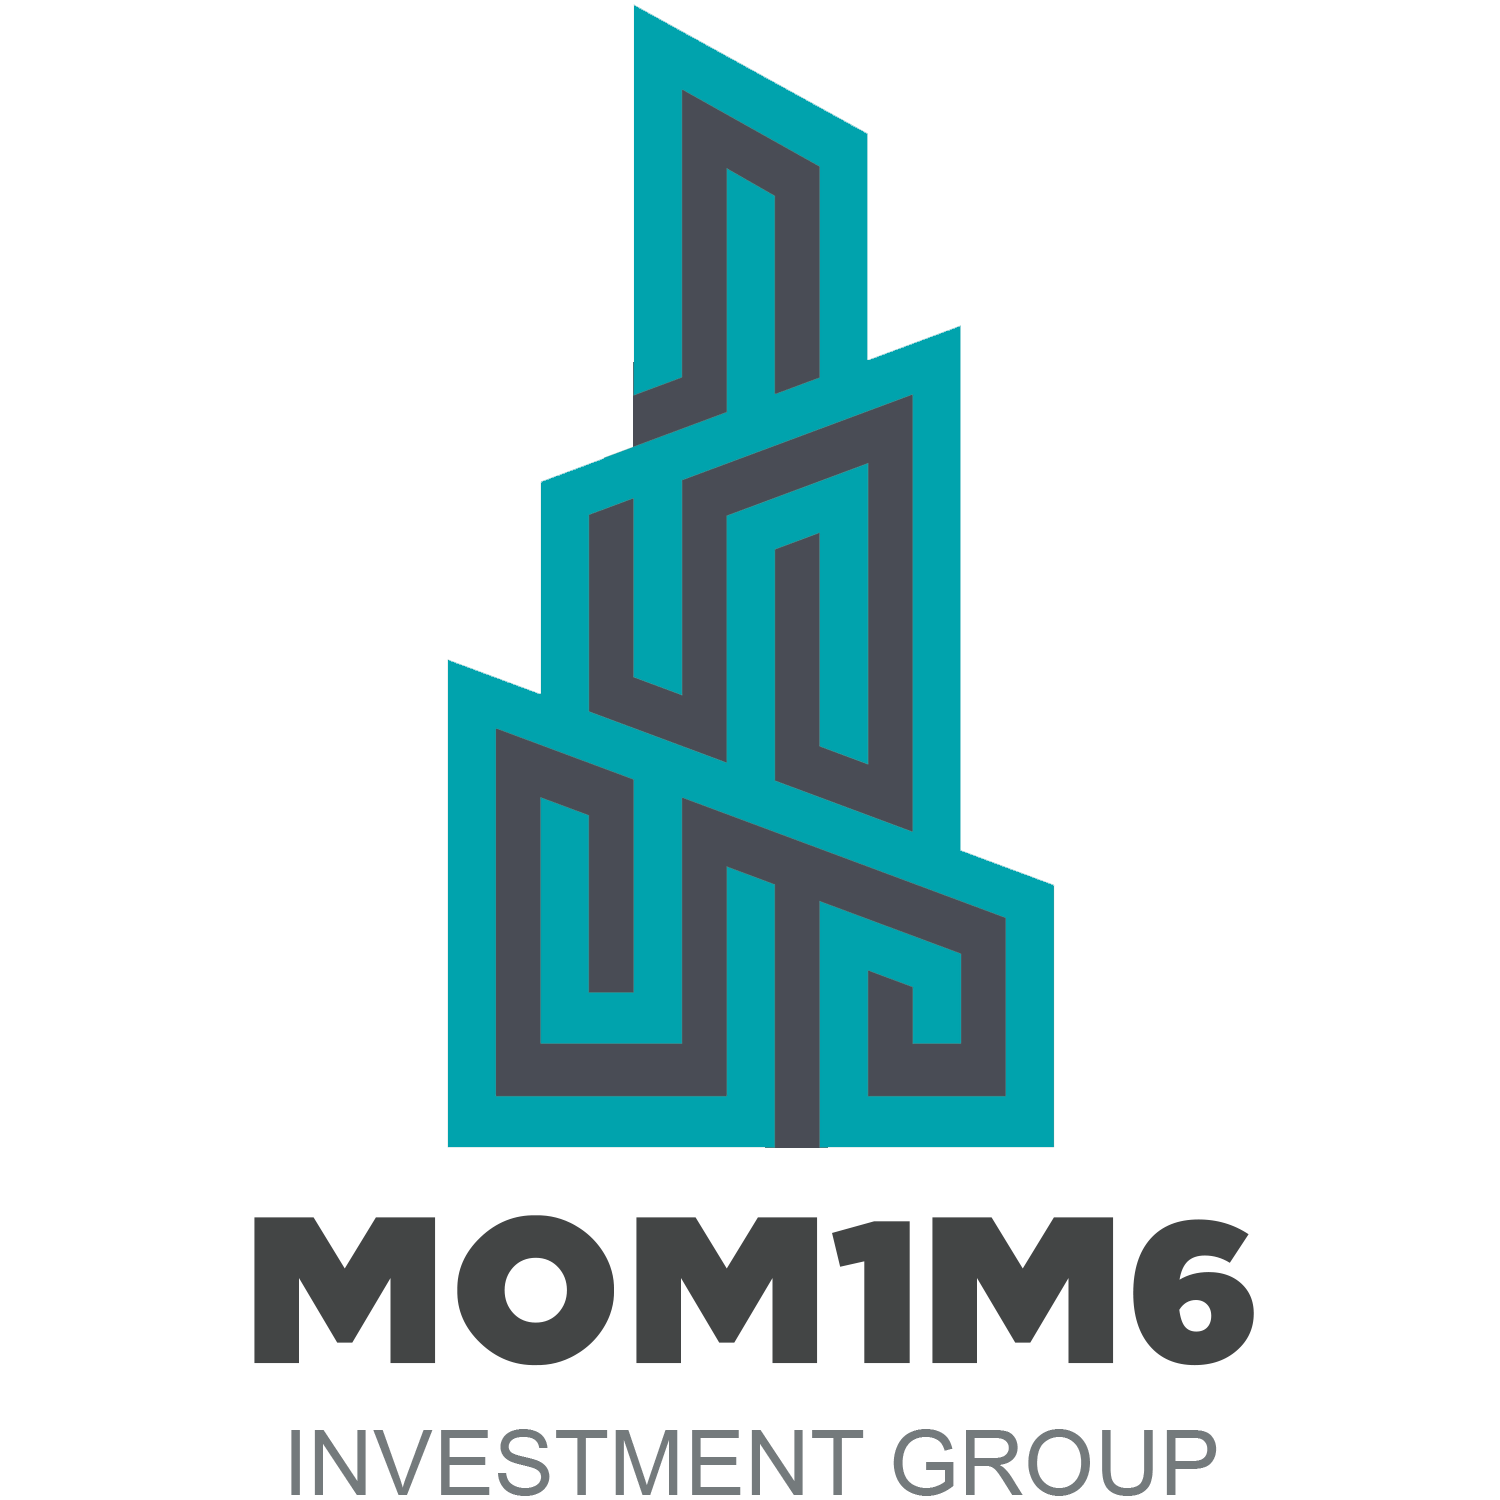 M0m1m6 Investment Group